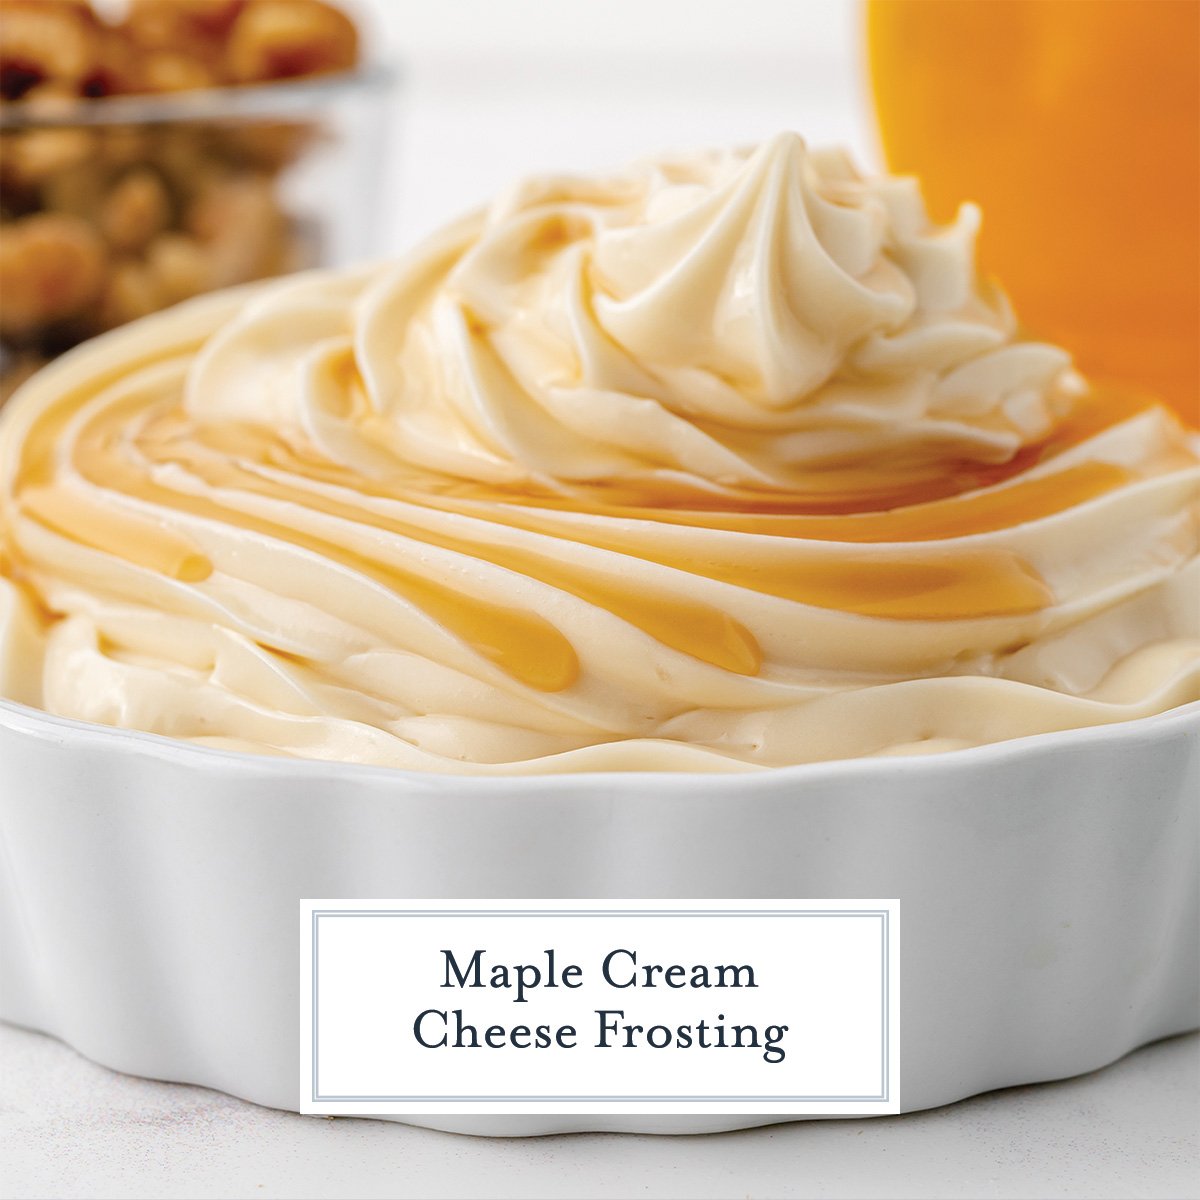 maple cream cheese frosting with text overlay